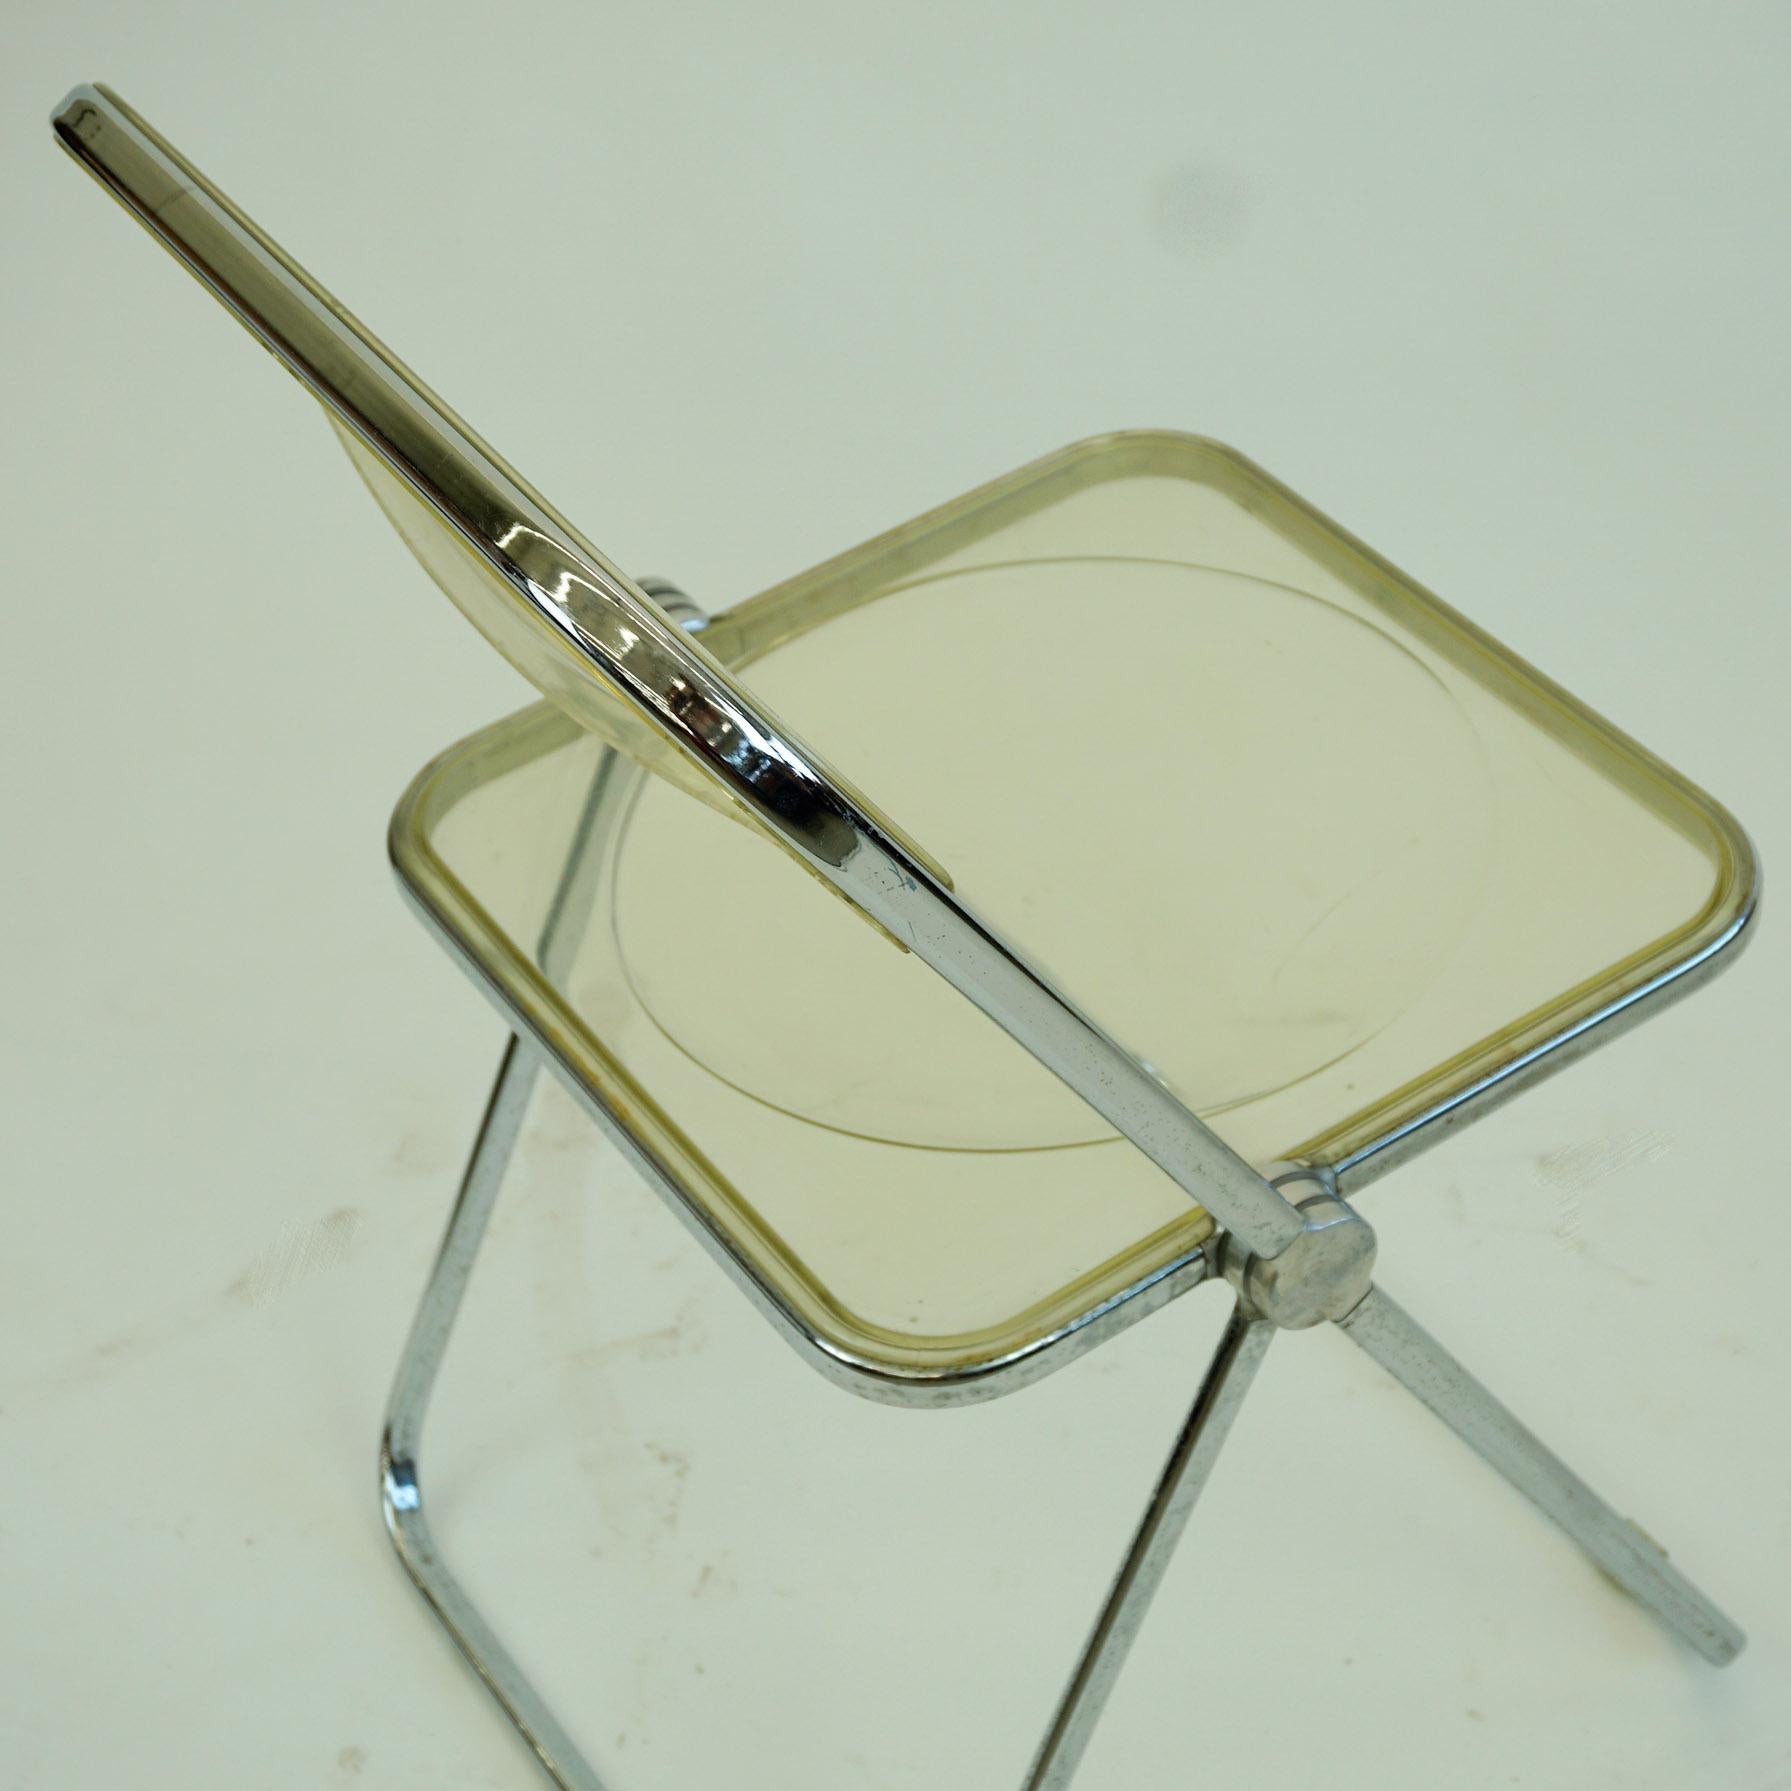 Italian 1960s Chrome and Lucite Plia Folding Chairs by G. Piretti for Castelli 4